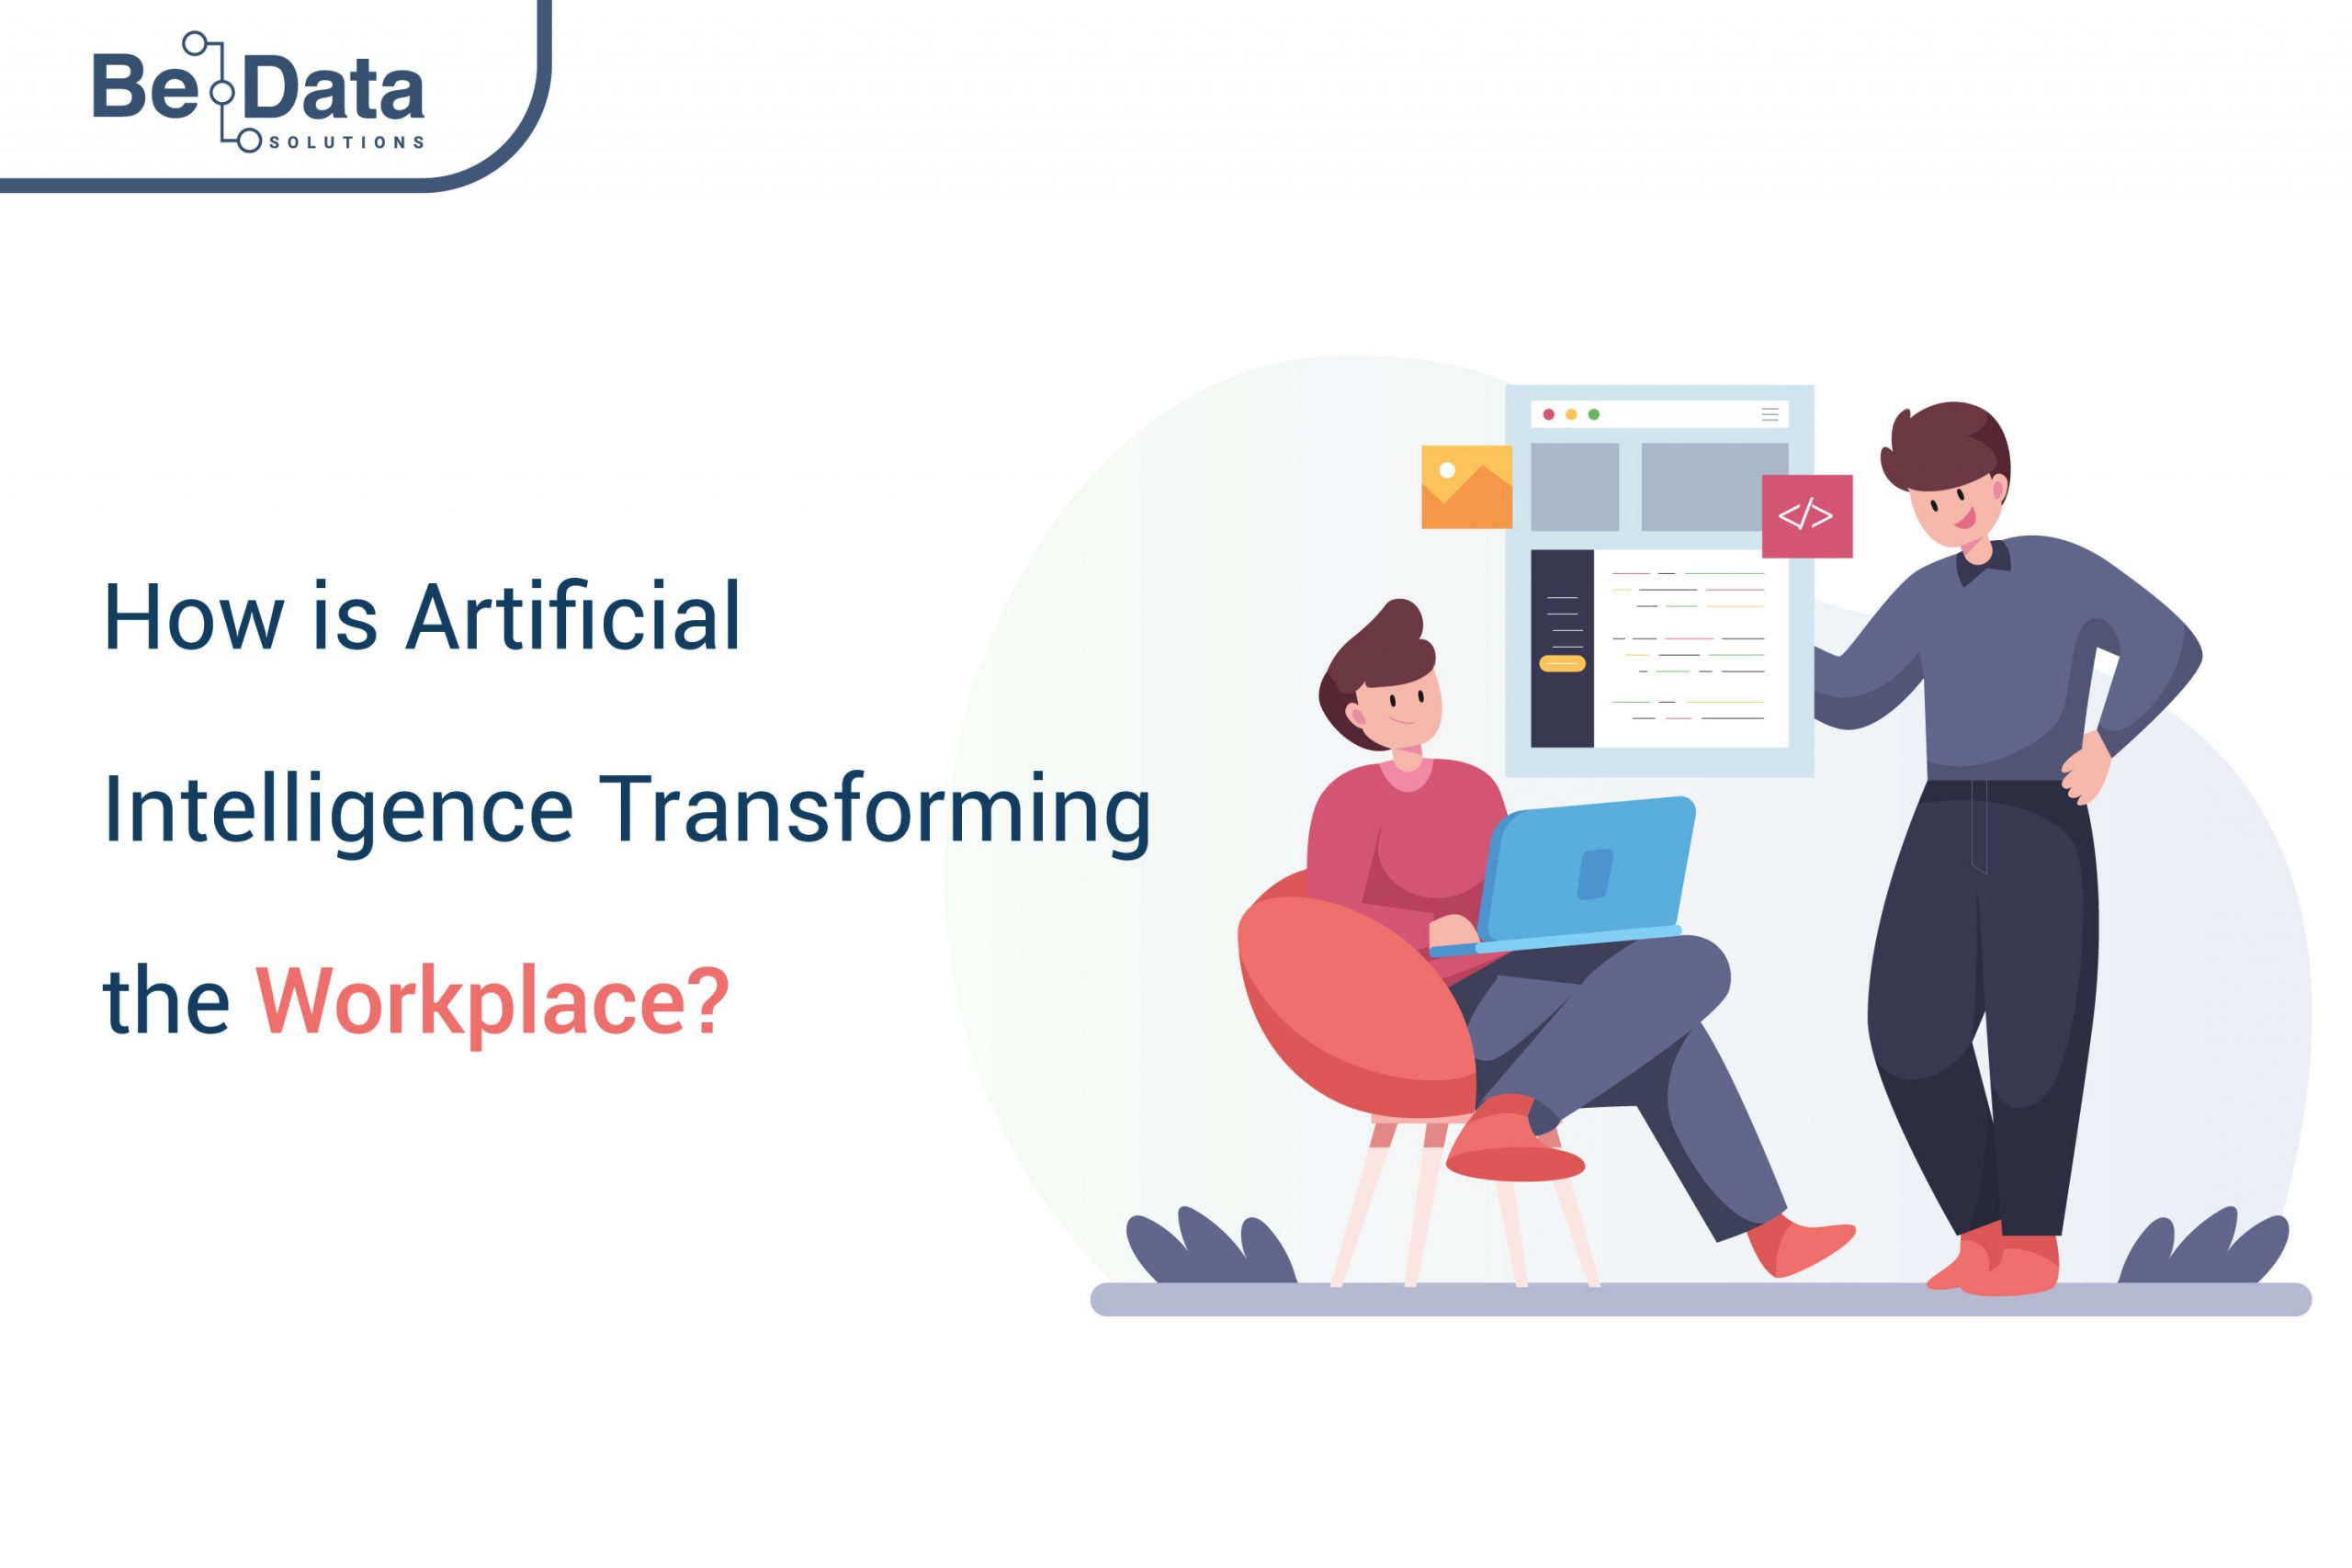 How Is Artificial Intelligence Transforming The Workplace?